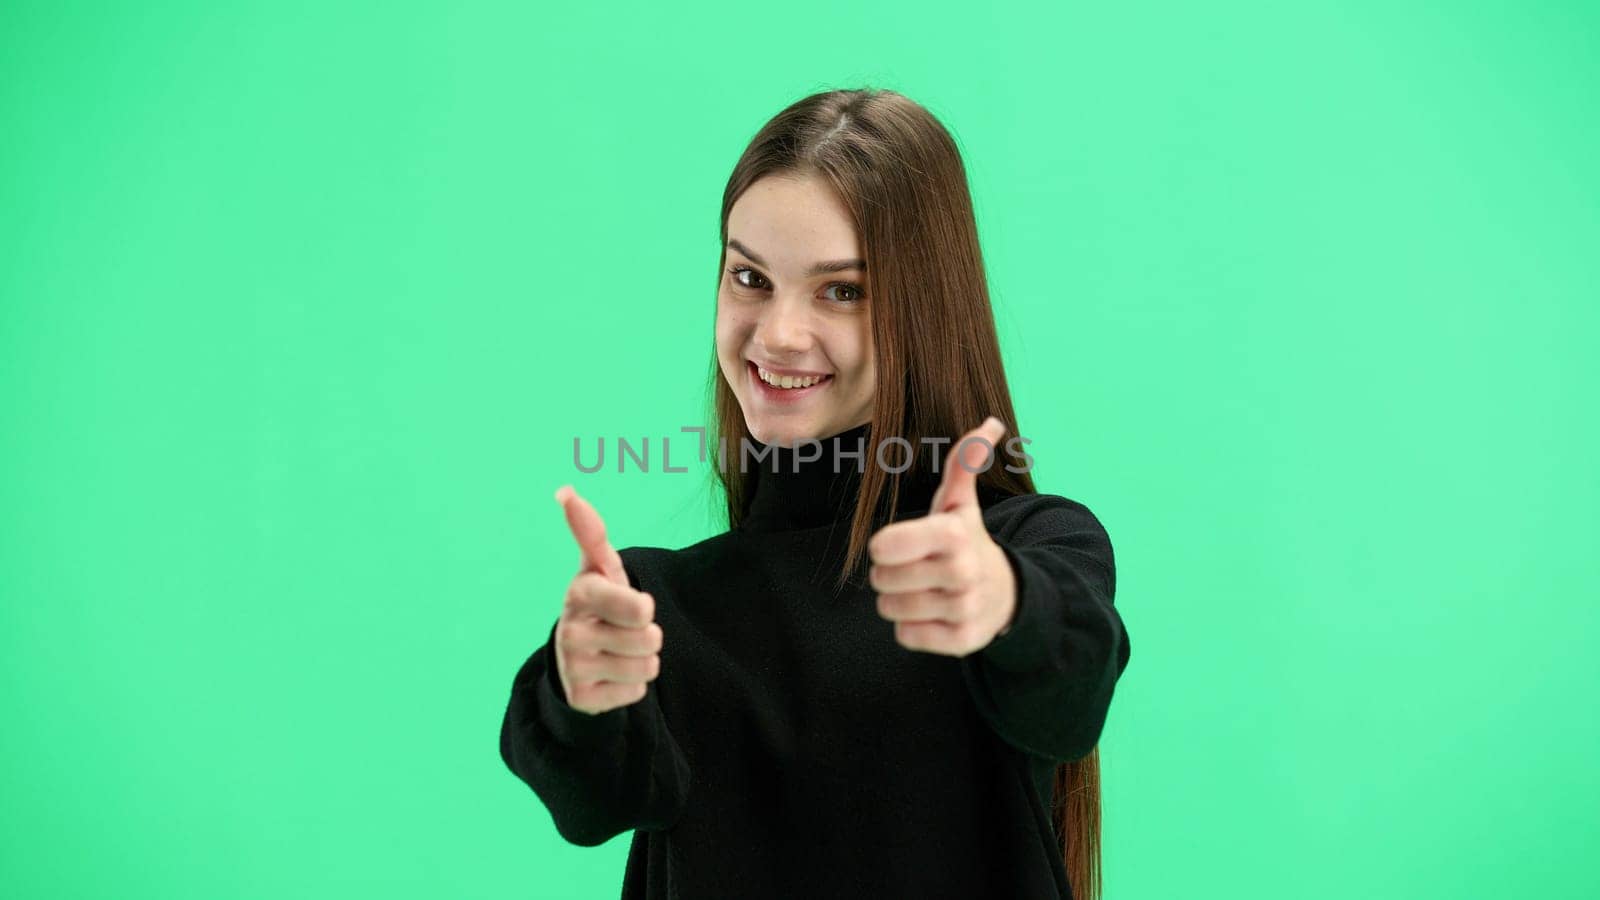 A woman, close-up, on a green background, shows her thumbs up.